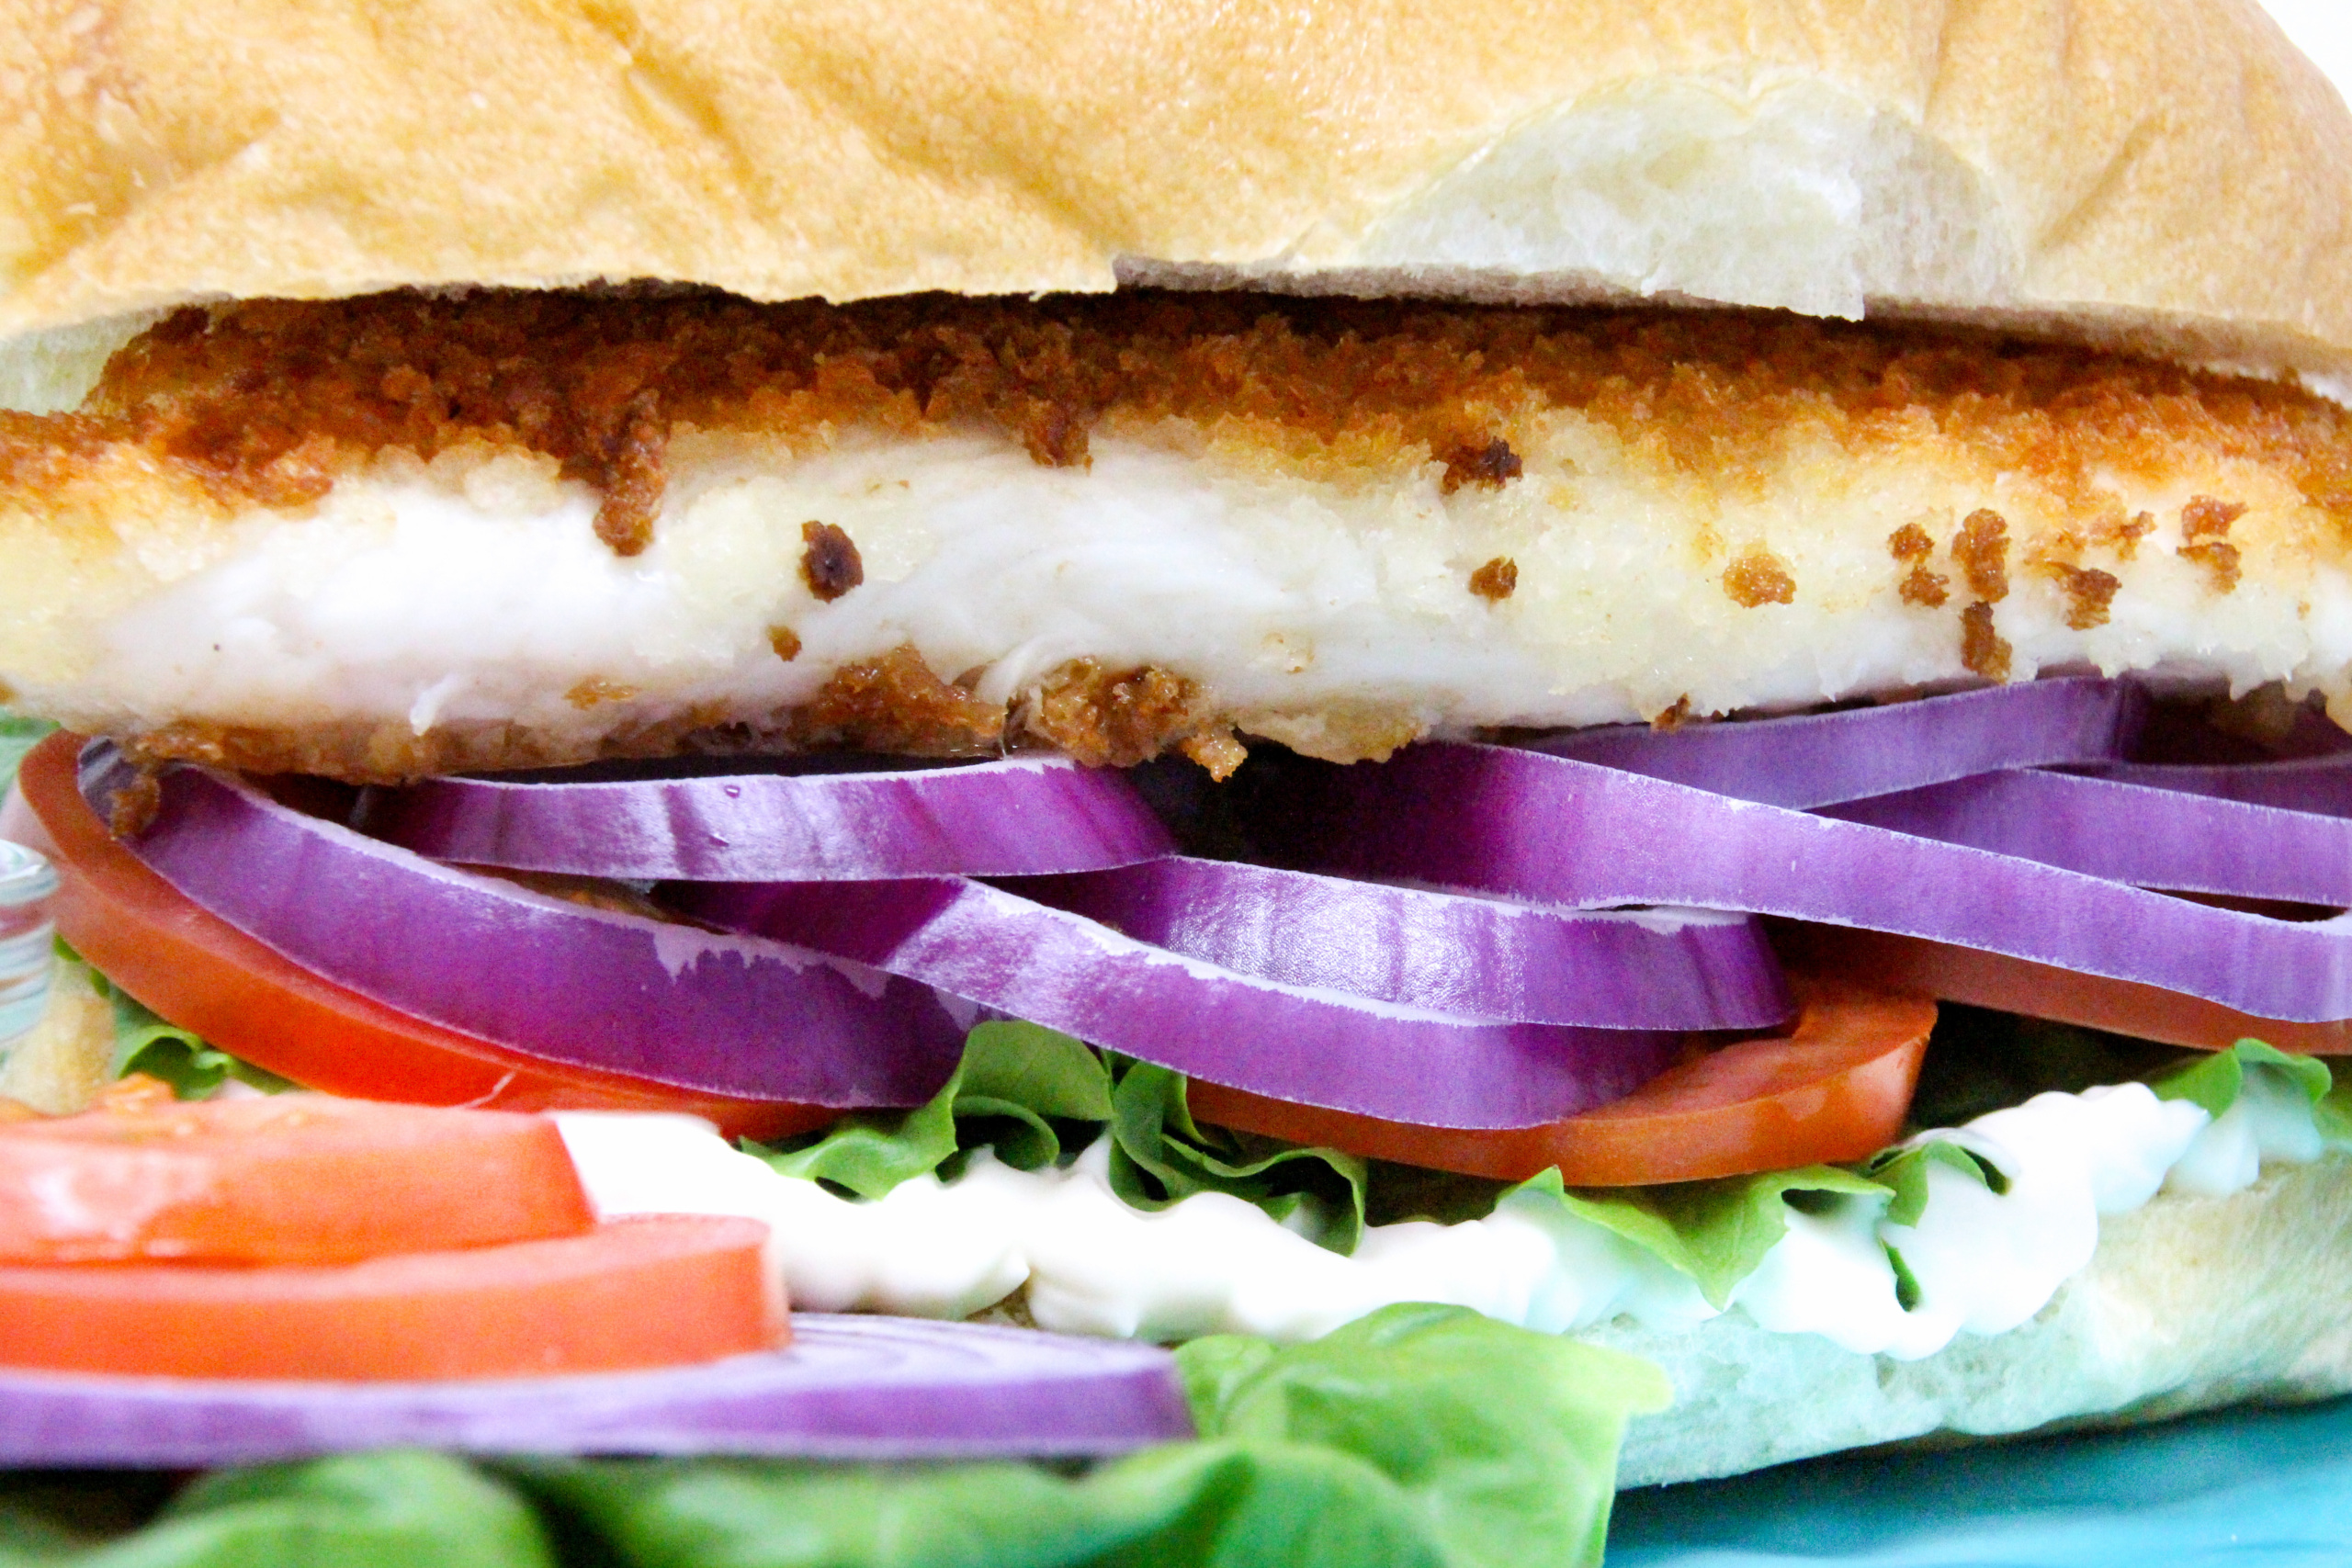 Fischbrötchen (German Fish Sandwich) uses a thin, pan-fried fillet, coated with breadcrumbs for a crispy exterior, and is layered with lettuce, red onions, peppers, and tomatoes for a delicious and hearty sandwich. Recipe shared with permission granted by T.C. LoTempio, author of MURDER FAUX PAWS.